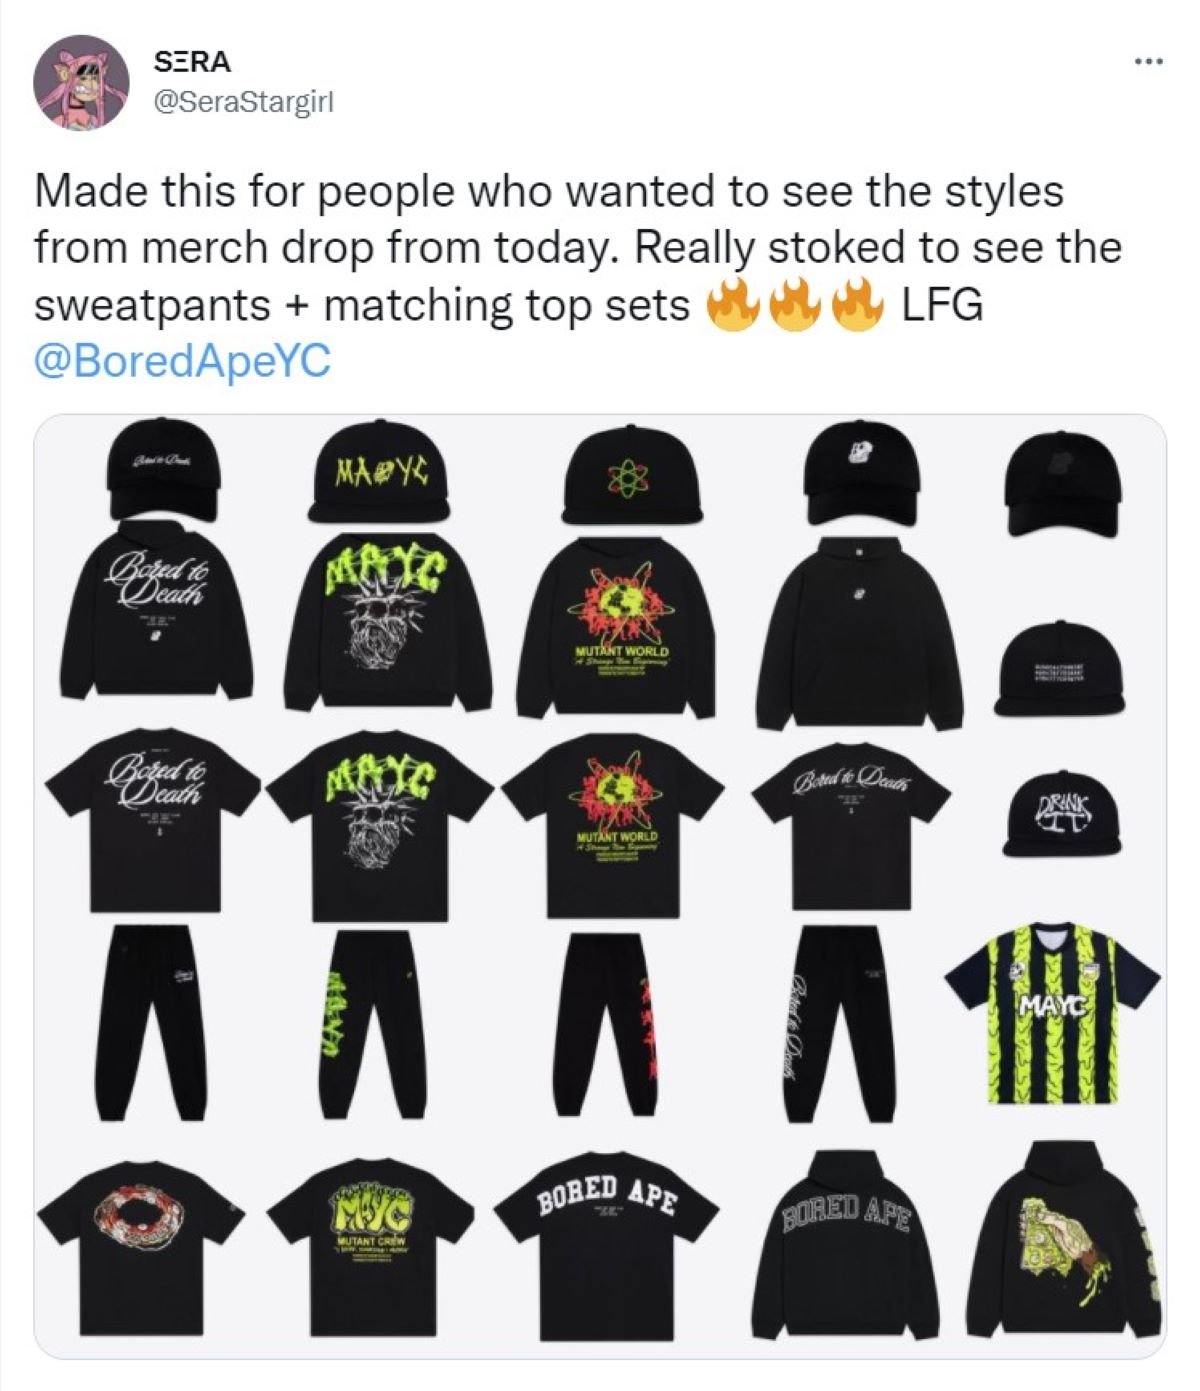 Image of different BAYC merch items